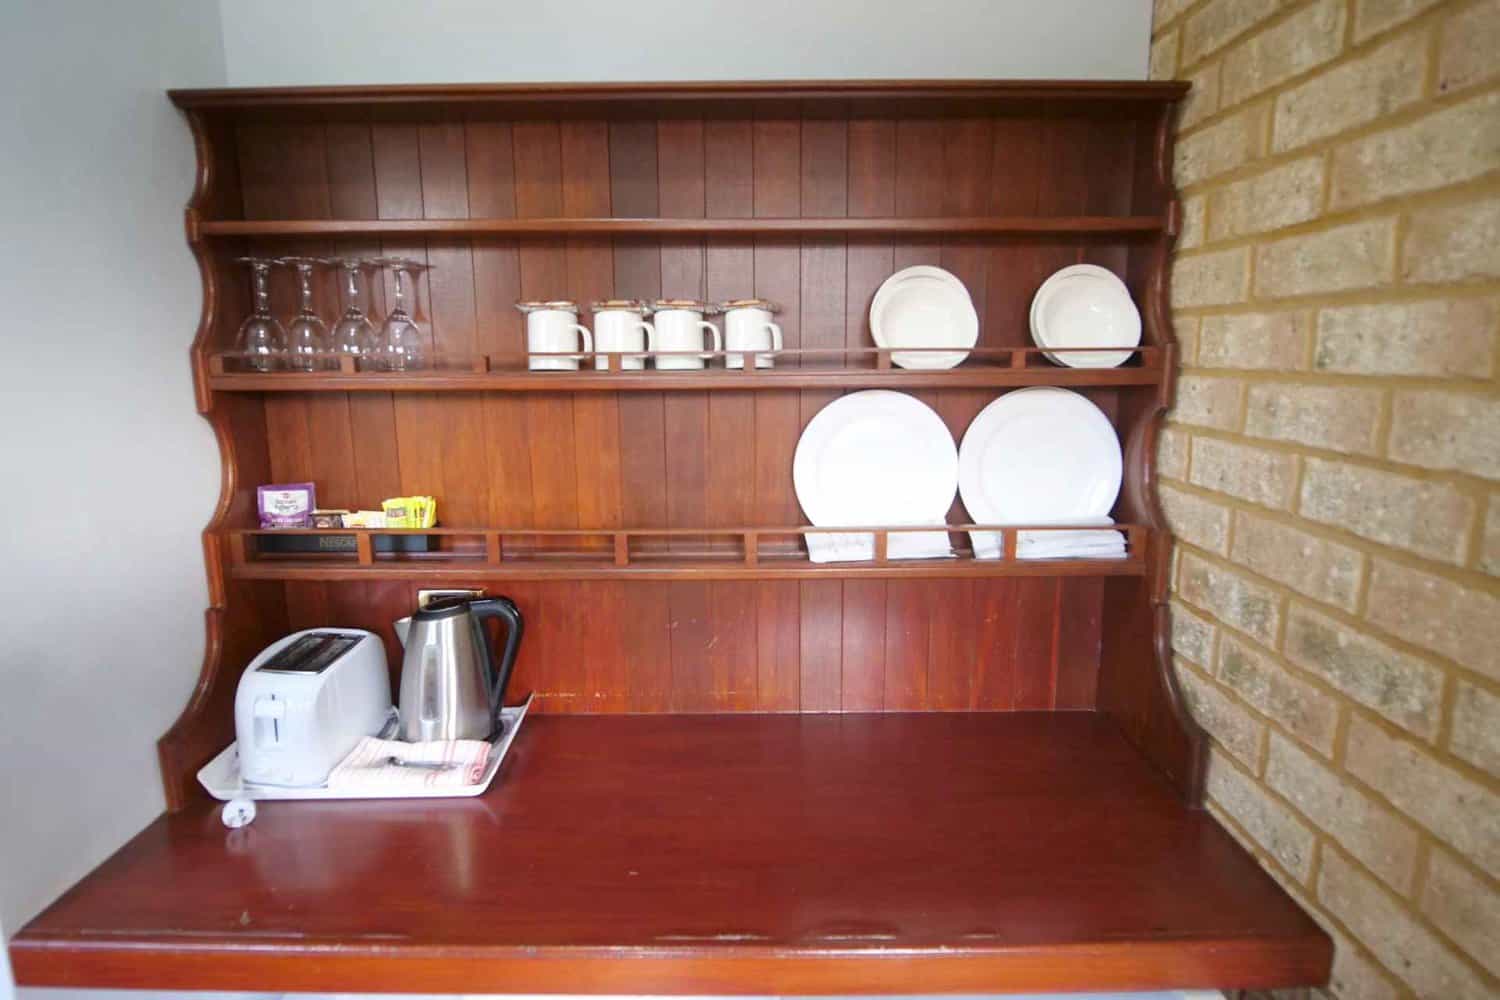 A well-equipped hotel room tea and coffee station featuring a toaster, kettle, mugs, wine glasses, plates, bowls, and a selection of tea and coffee, ready for guests to enjoy after making their hotel deposit.